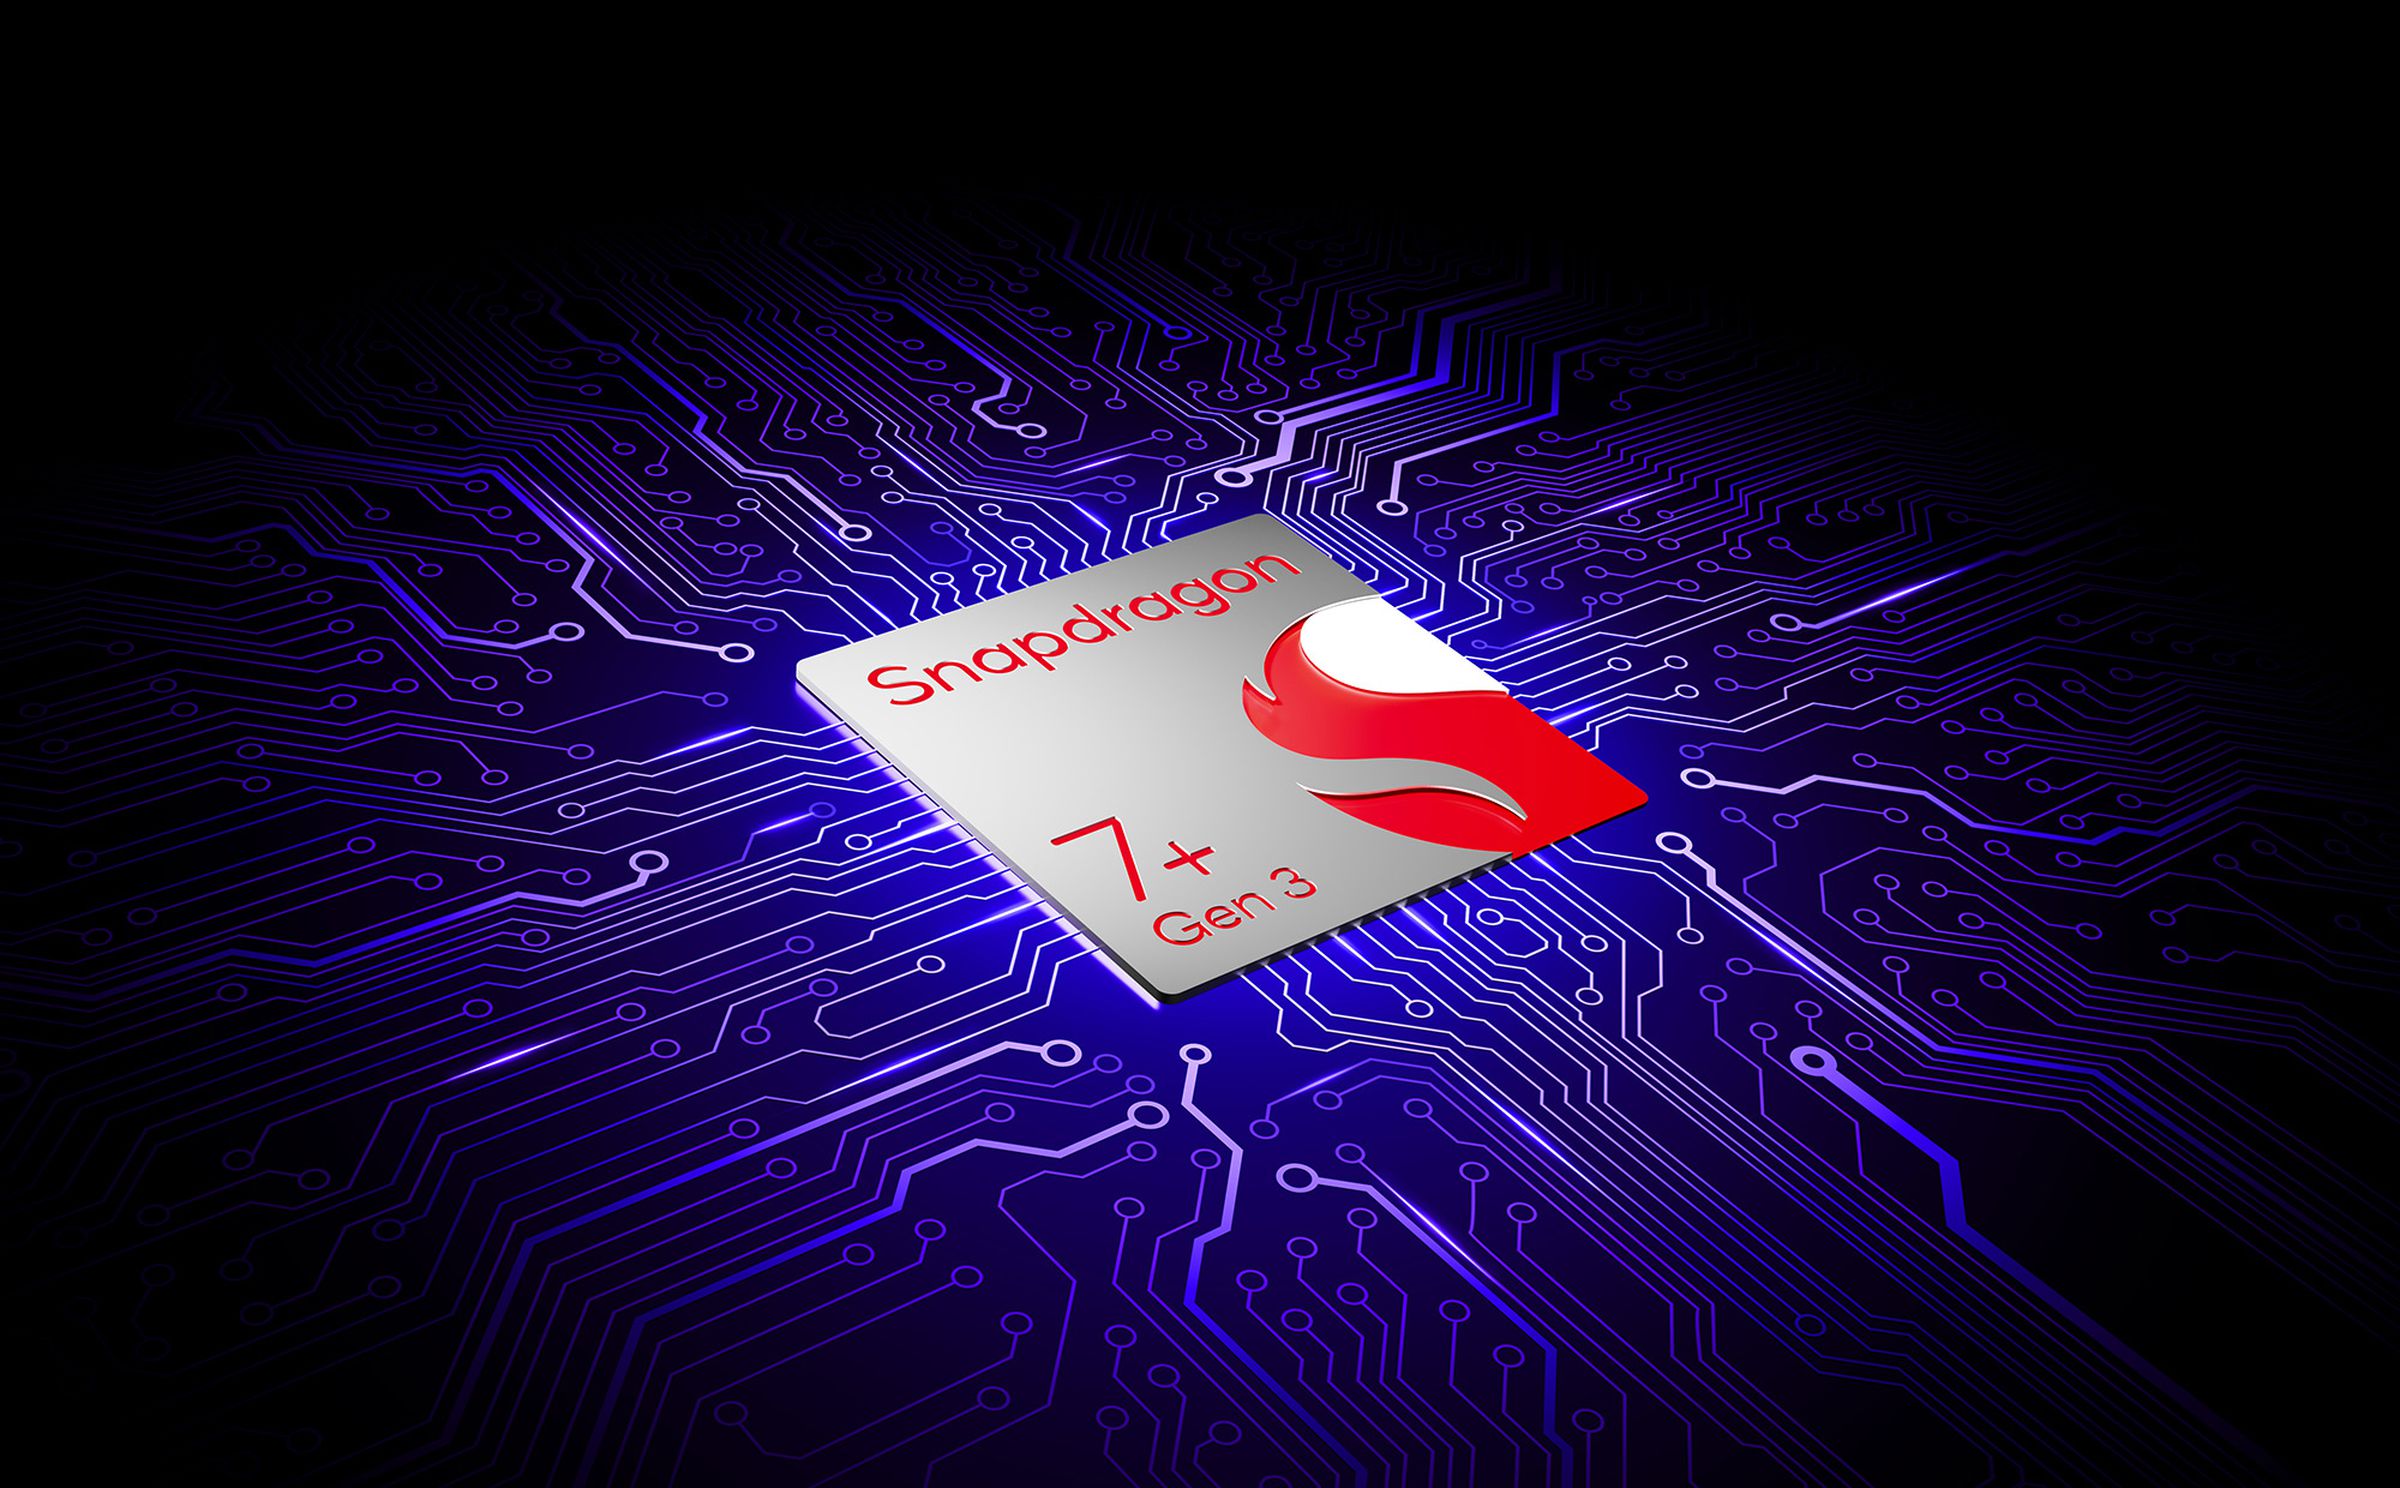 Rendering of the Snapdragon 7 Plus mobile chipset.